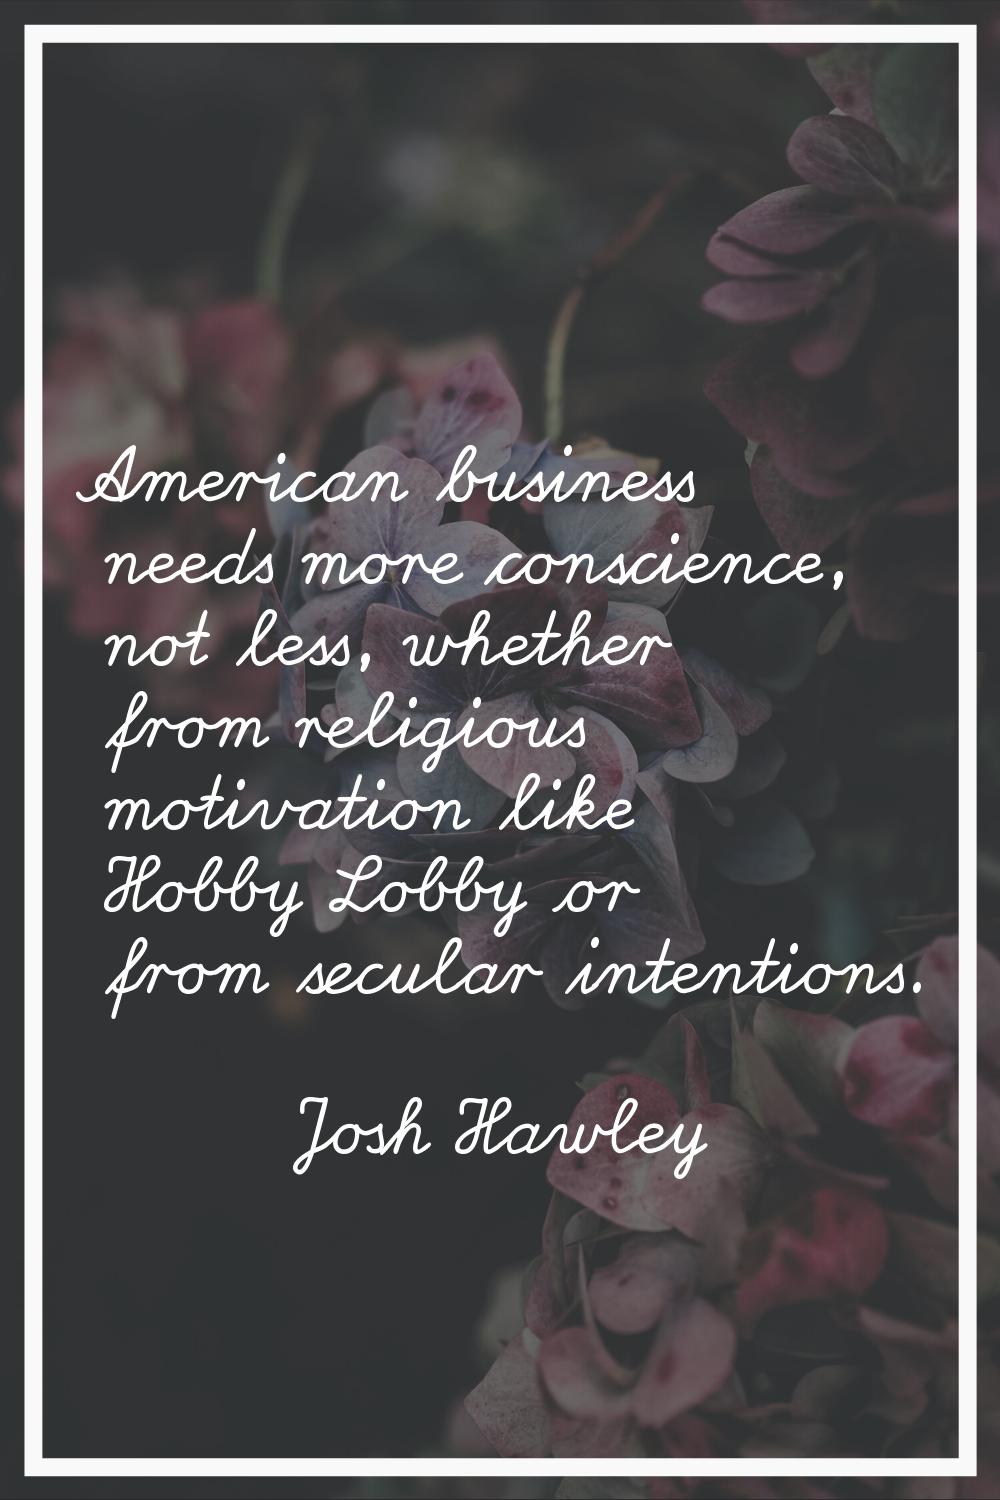 American business needs more conscience, not less, whether from religious motivation like Hobby Lob